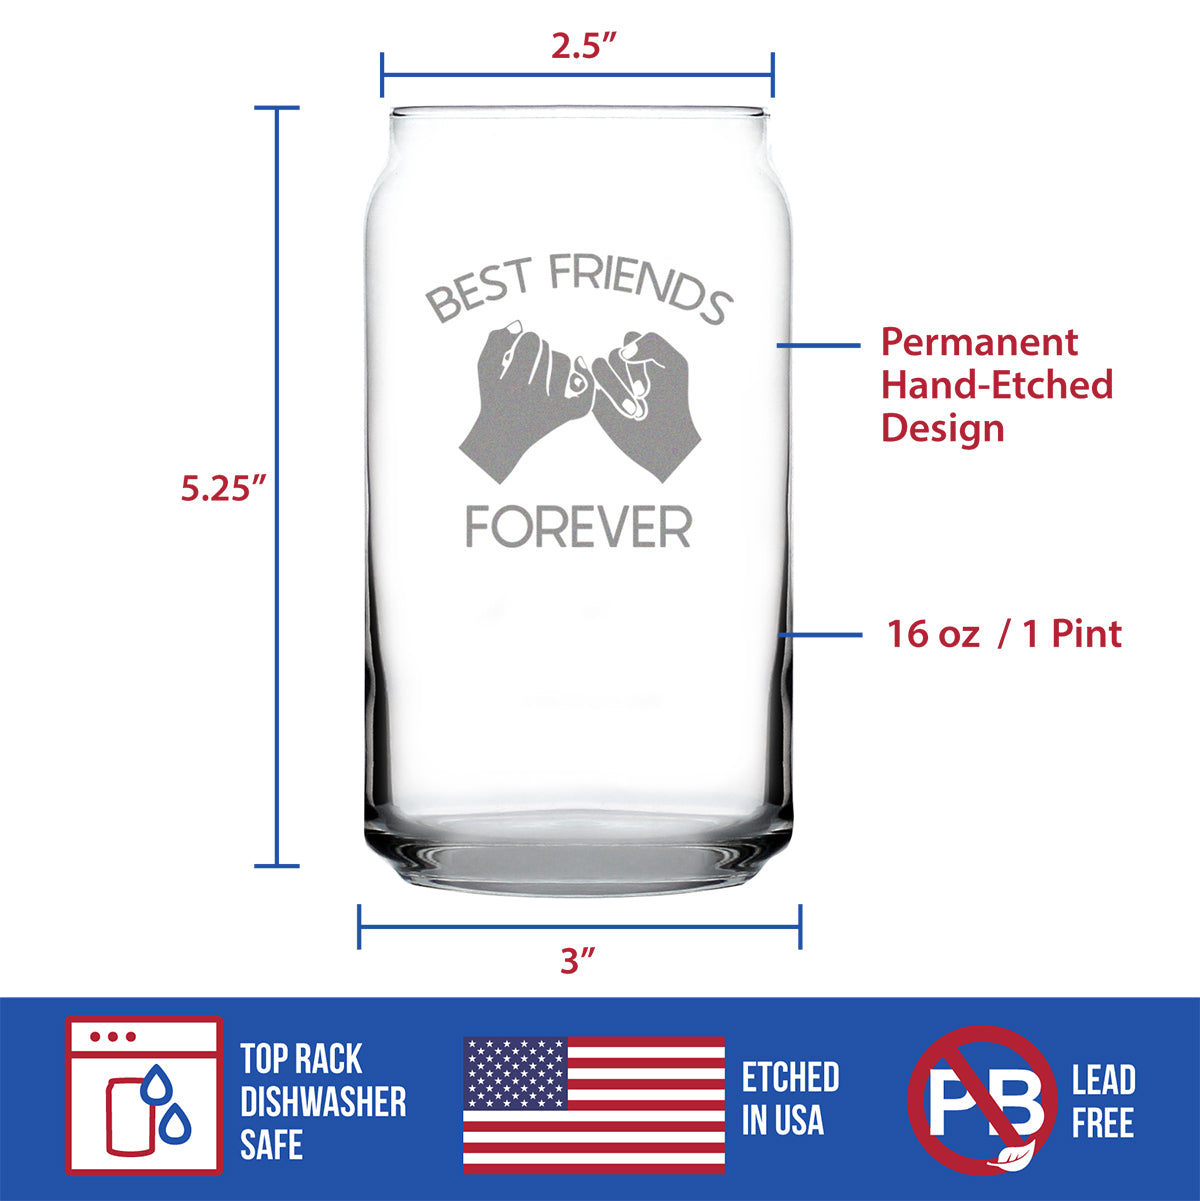 Best Friends Forever - Beer Can Pint Glass - Cute Funny Farewell Gift For BFF Moving Away - Pinky Promise - - 16 oz Glasses